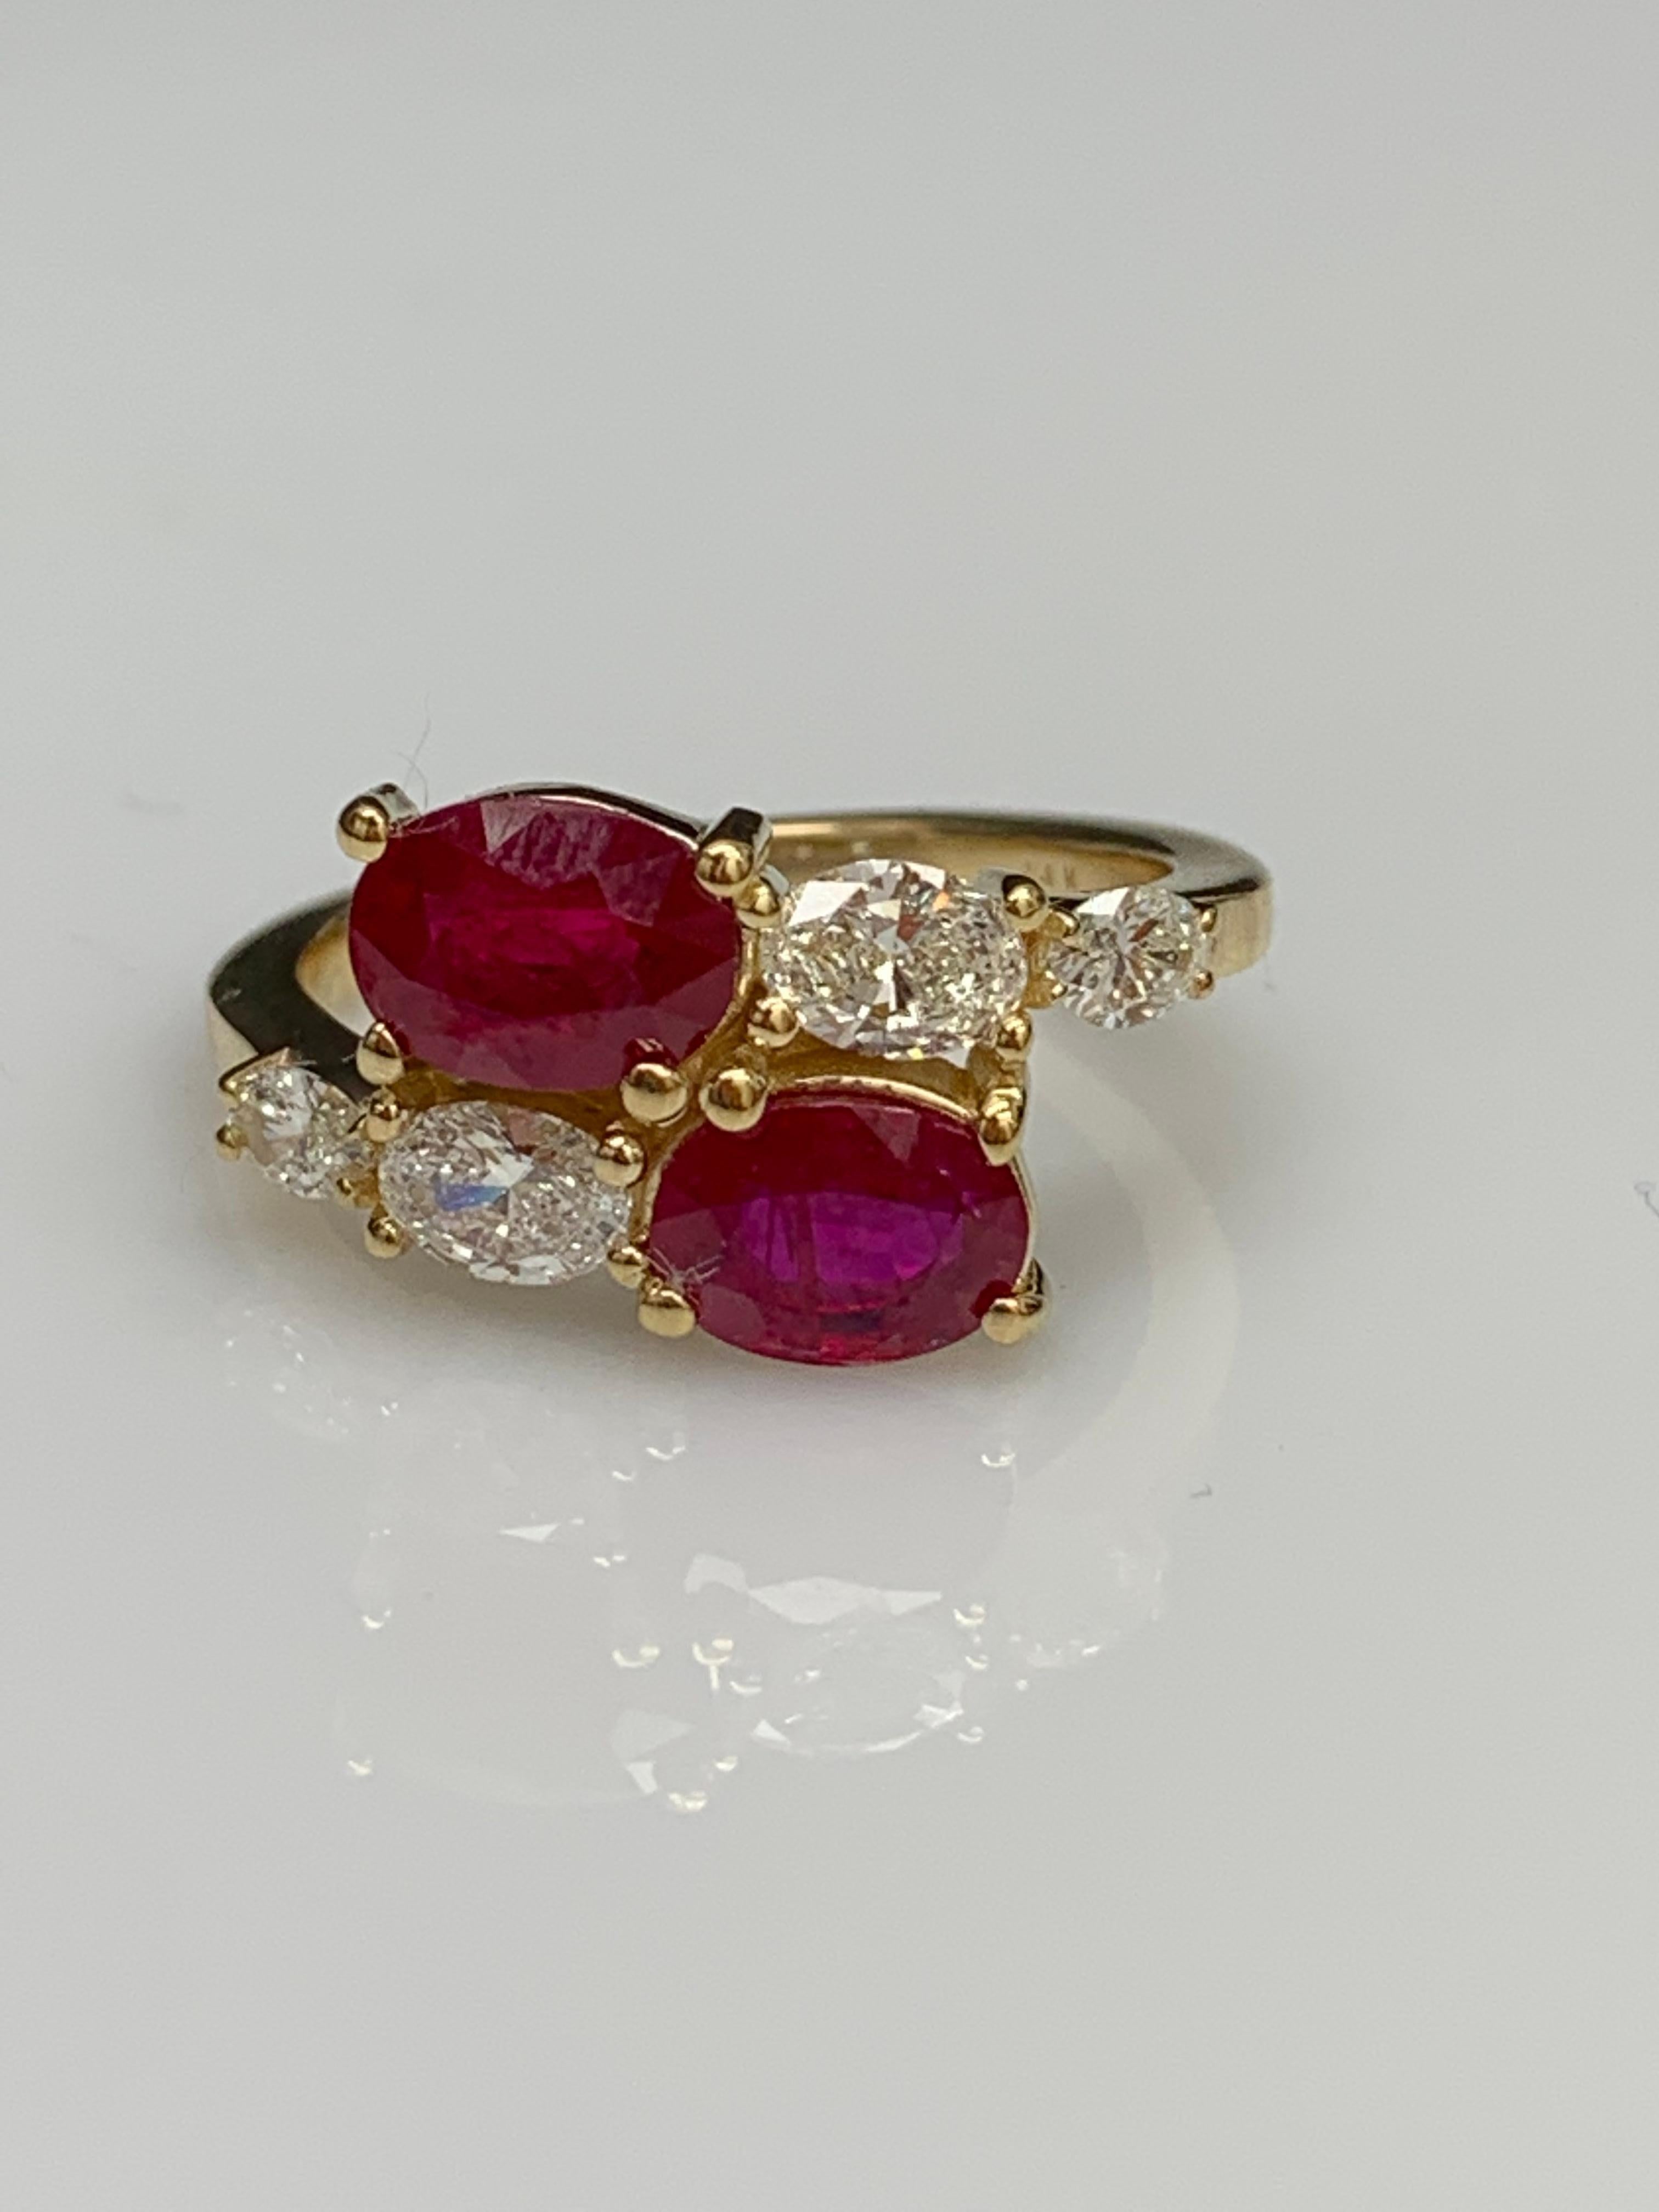 2.18 Carat Oval Cut Ruby Diamond Toi et Moi Engagement Ring in 14K Yellow Gold For Sale 6